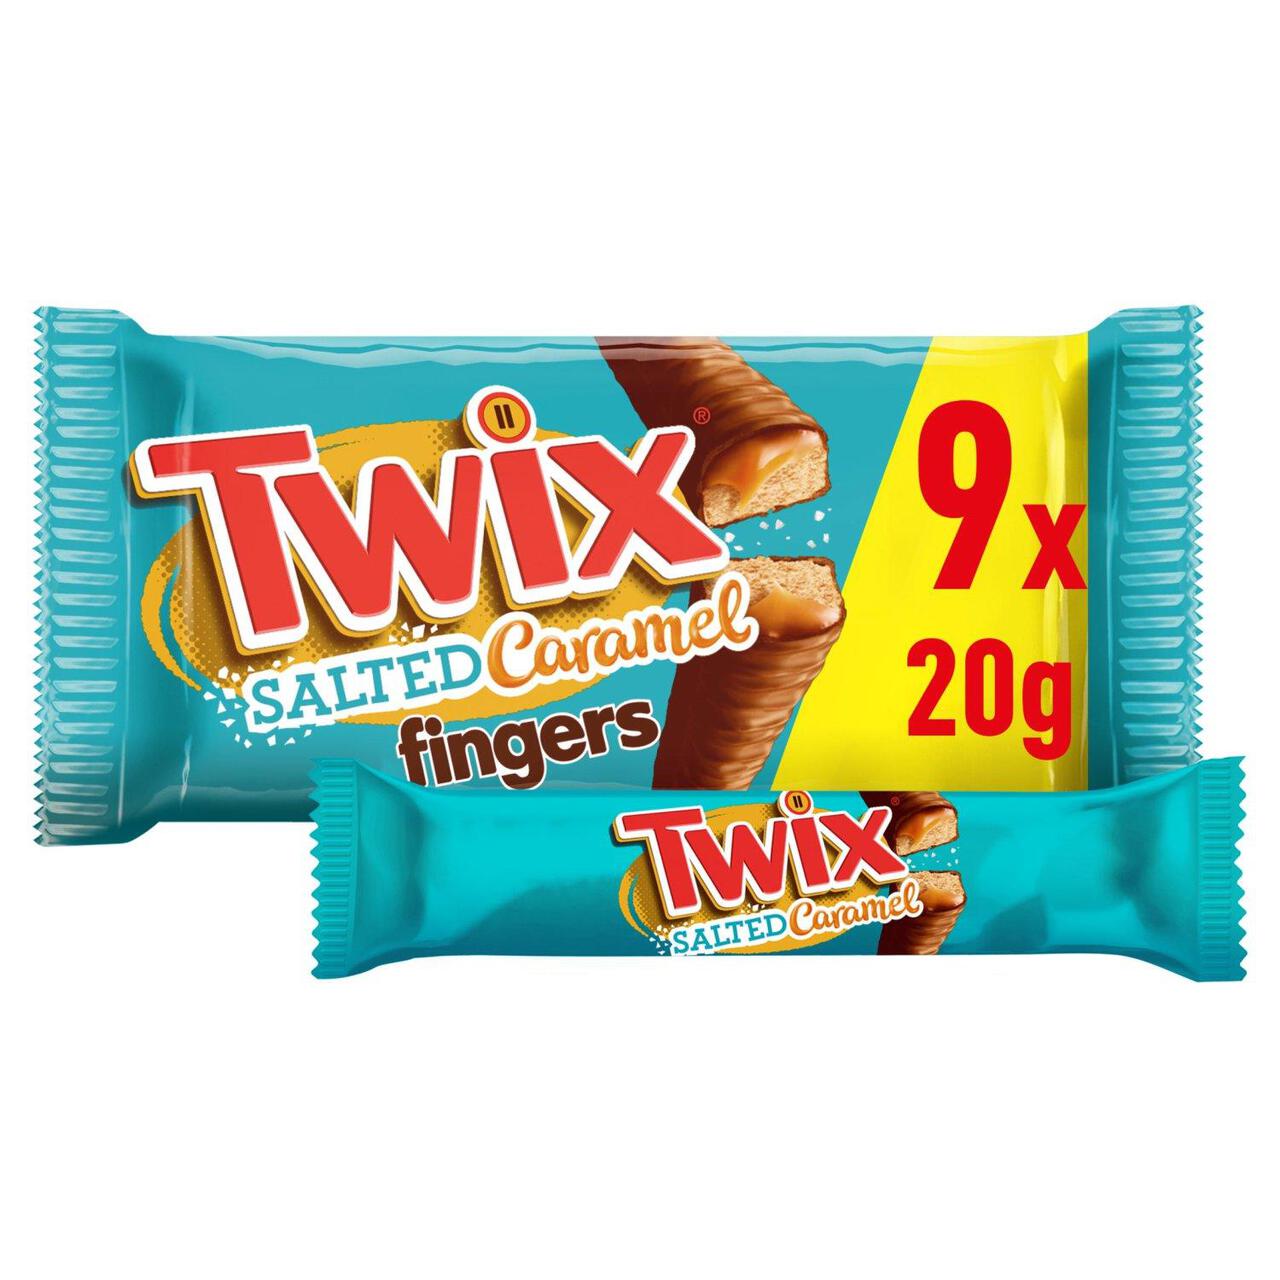 Twix Salted Caramel & Milk Chocolate Fingers Biscuit Snack Bars Multipack 9 x 20g